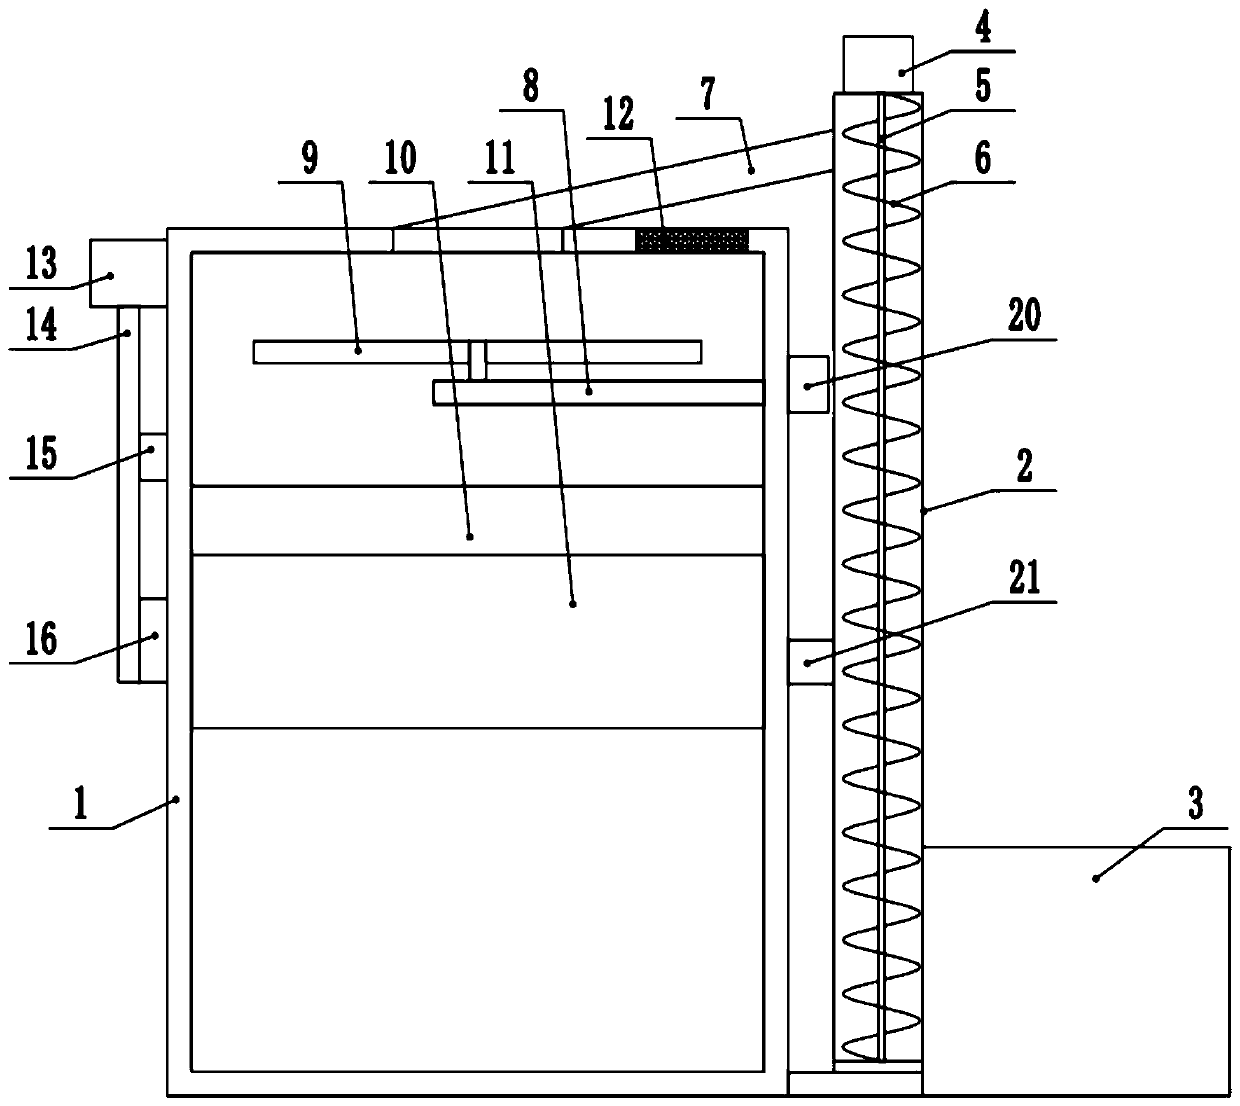 Multi-stage unhulled rice dust removing device for processing rice